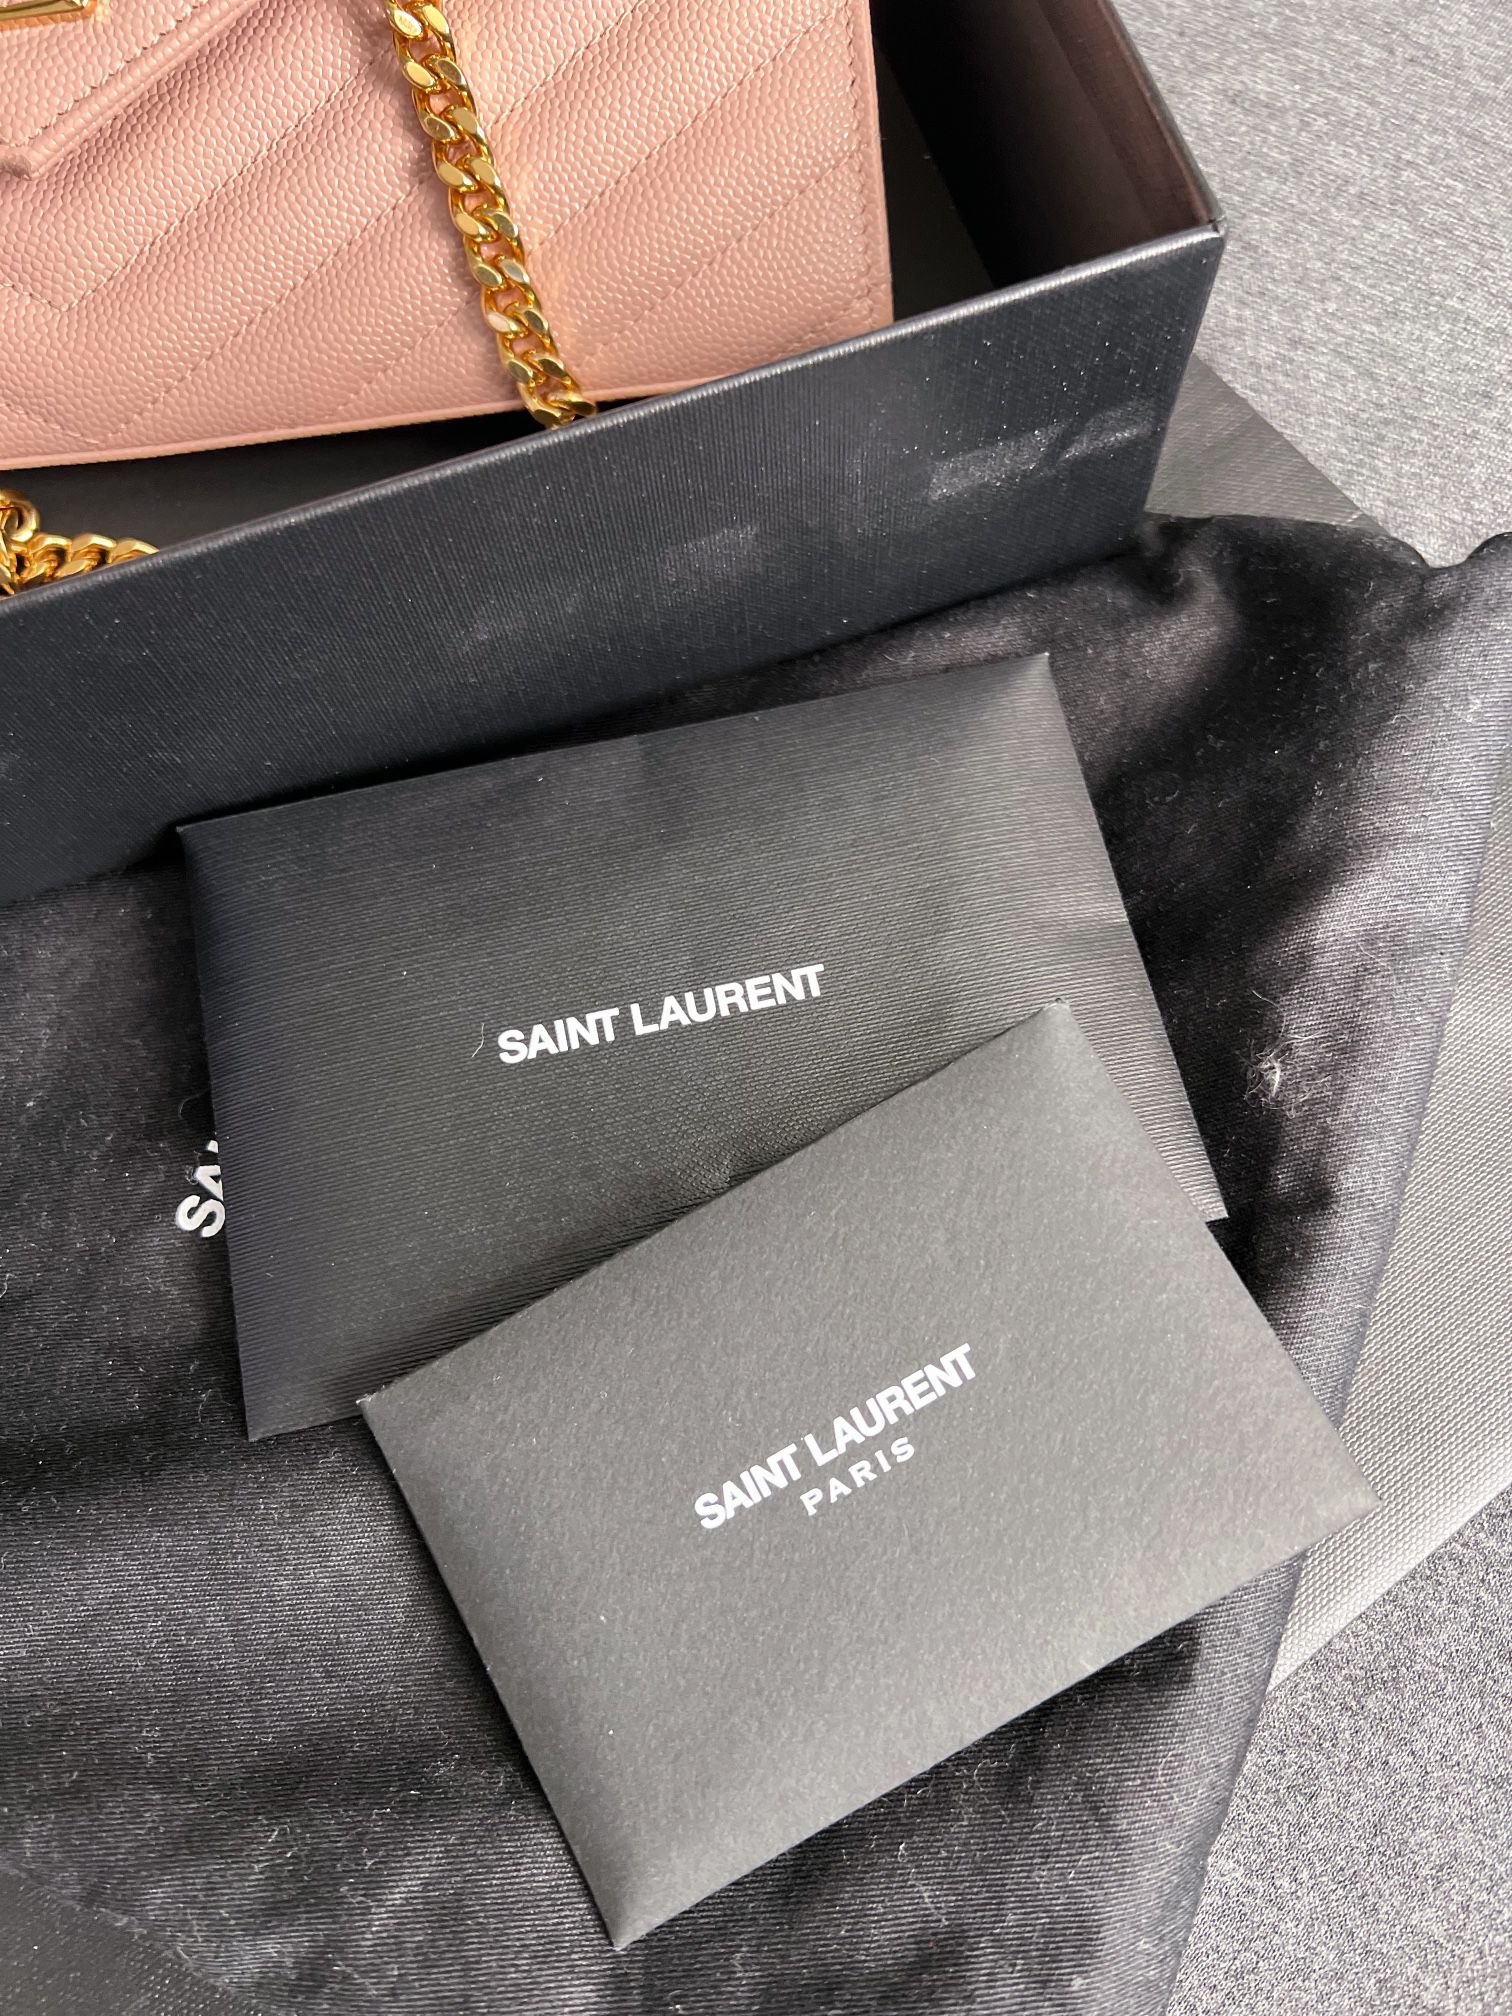 YSL Uptown Chain Wallet for Sale in Levittown, NY - OfferUp